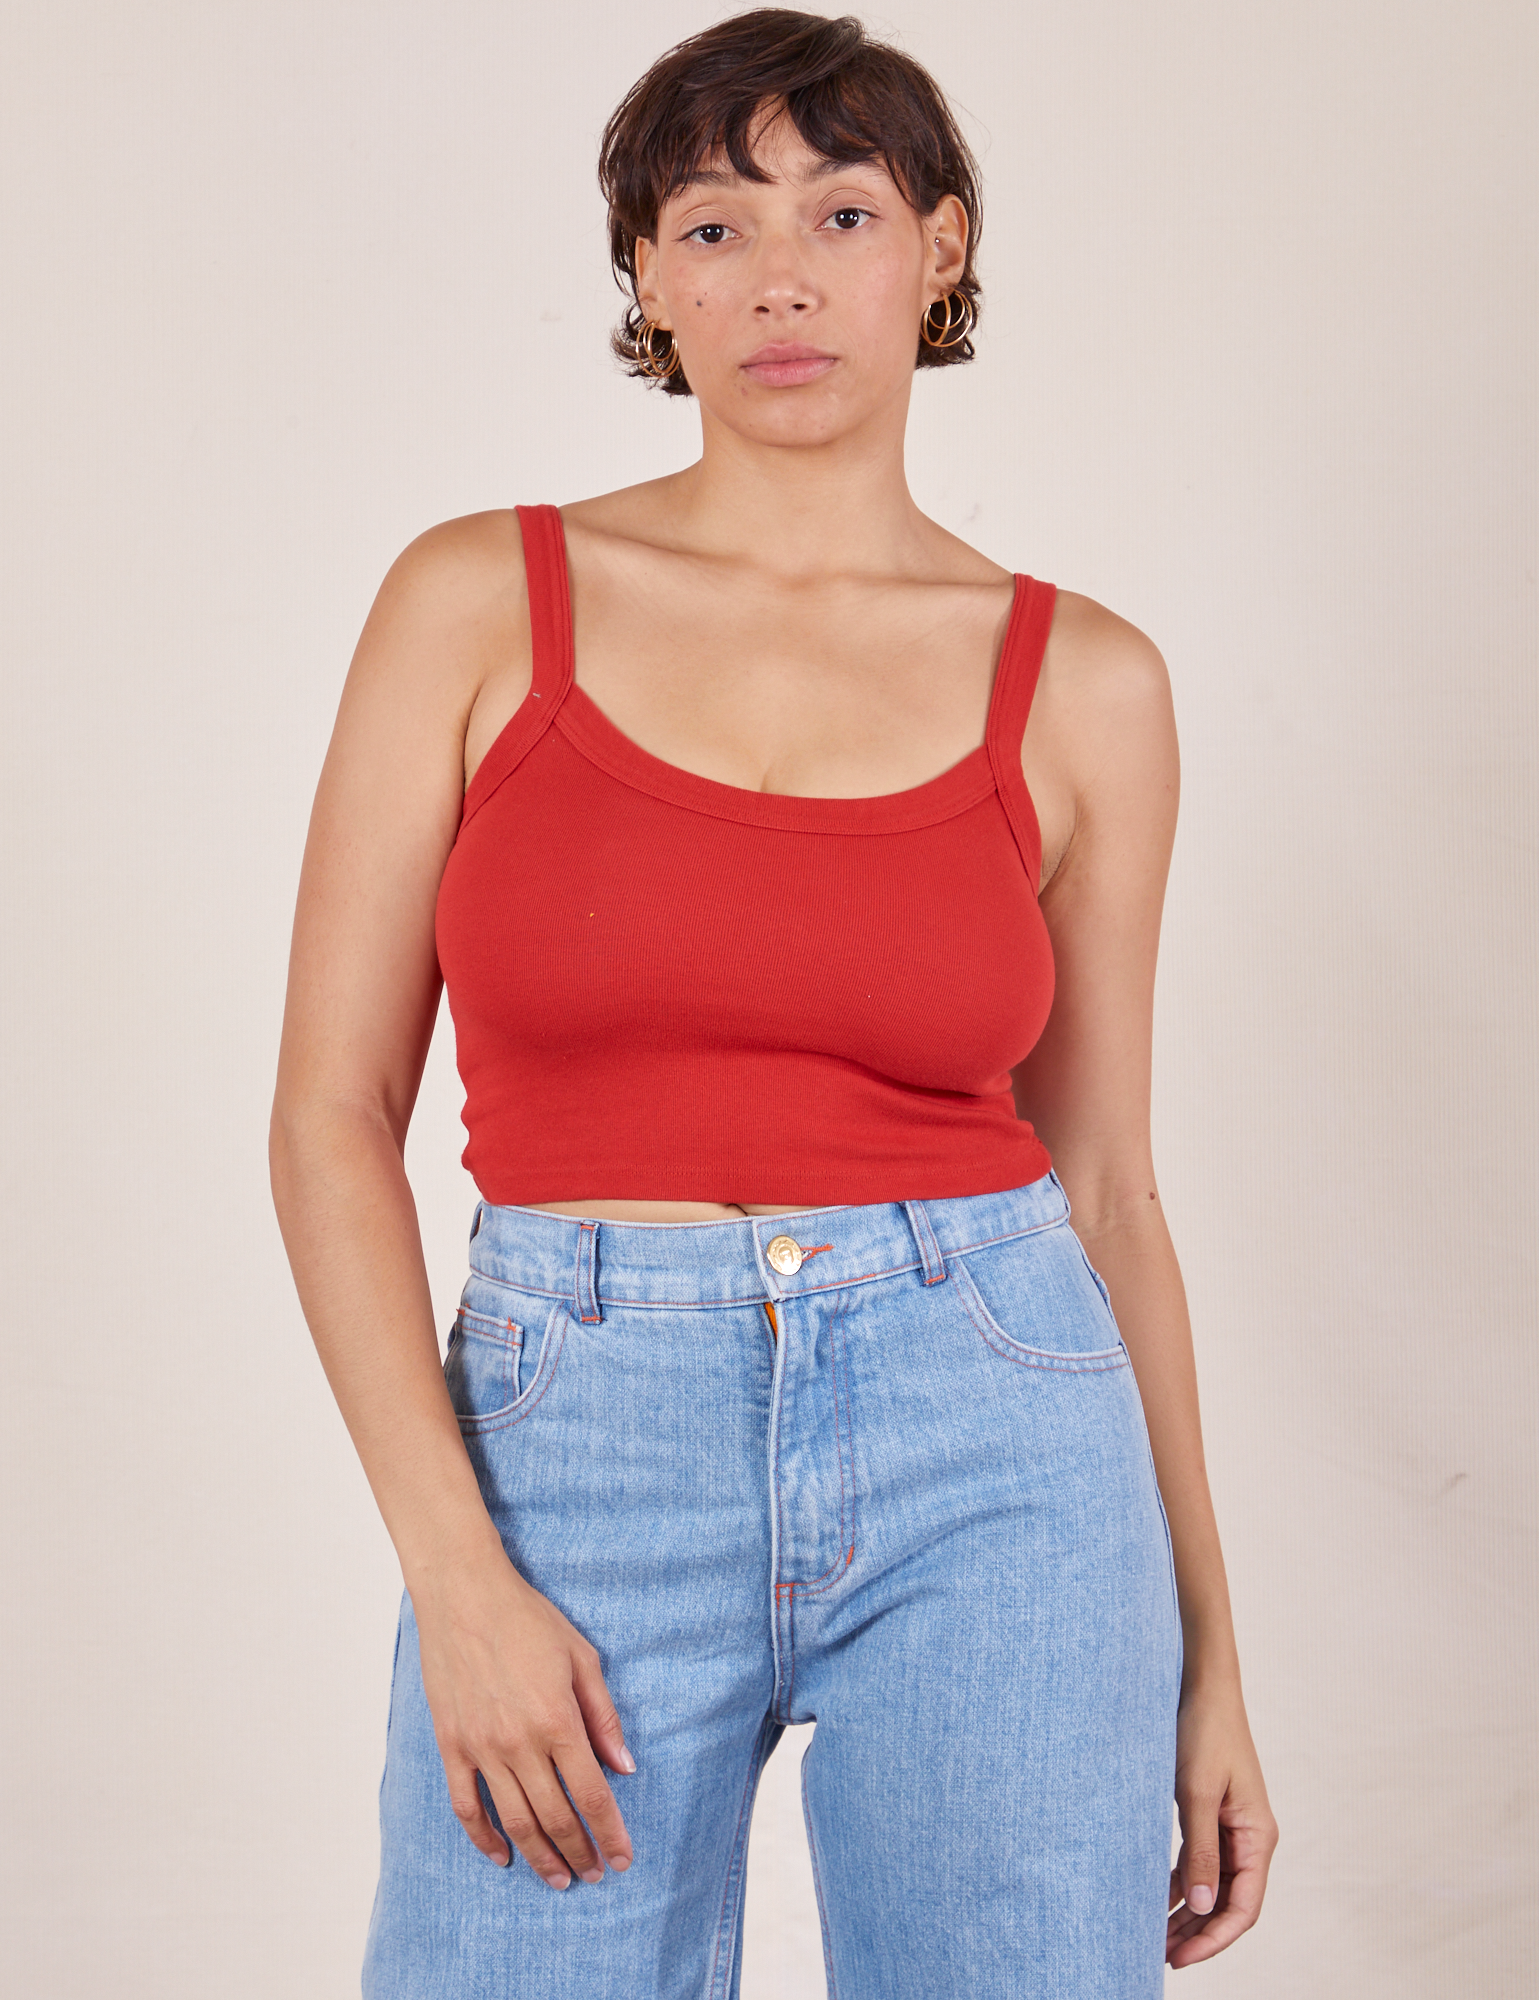 Tiara is 5&#39;4&quot; and wearing XS Cropped Cami in Mustang Red paired with light wash Sailor Jeans